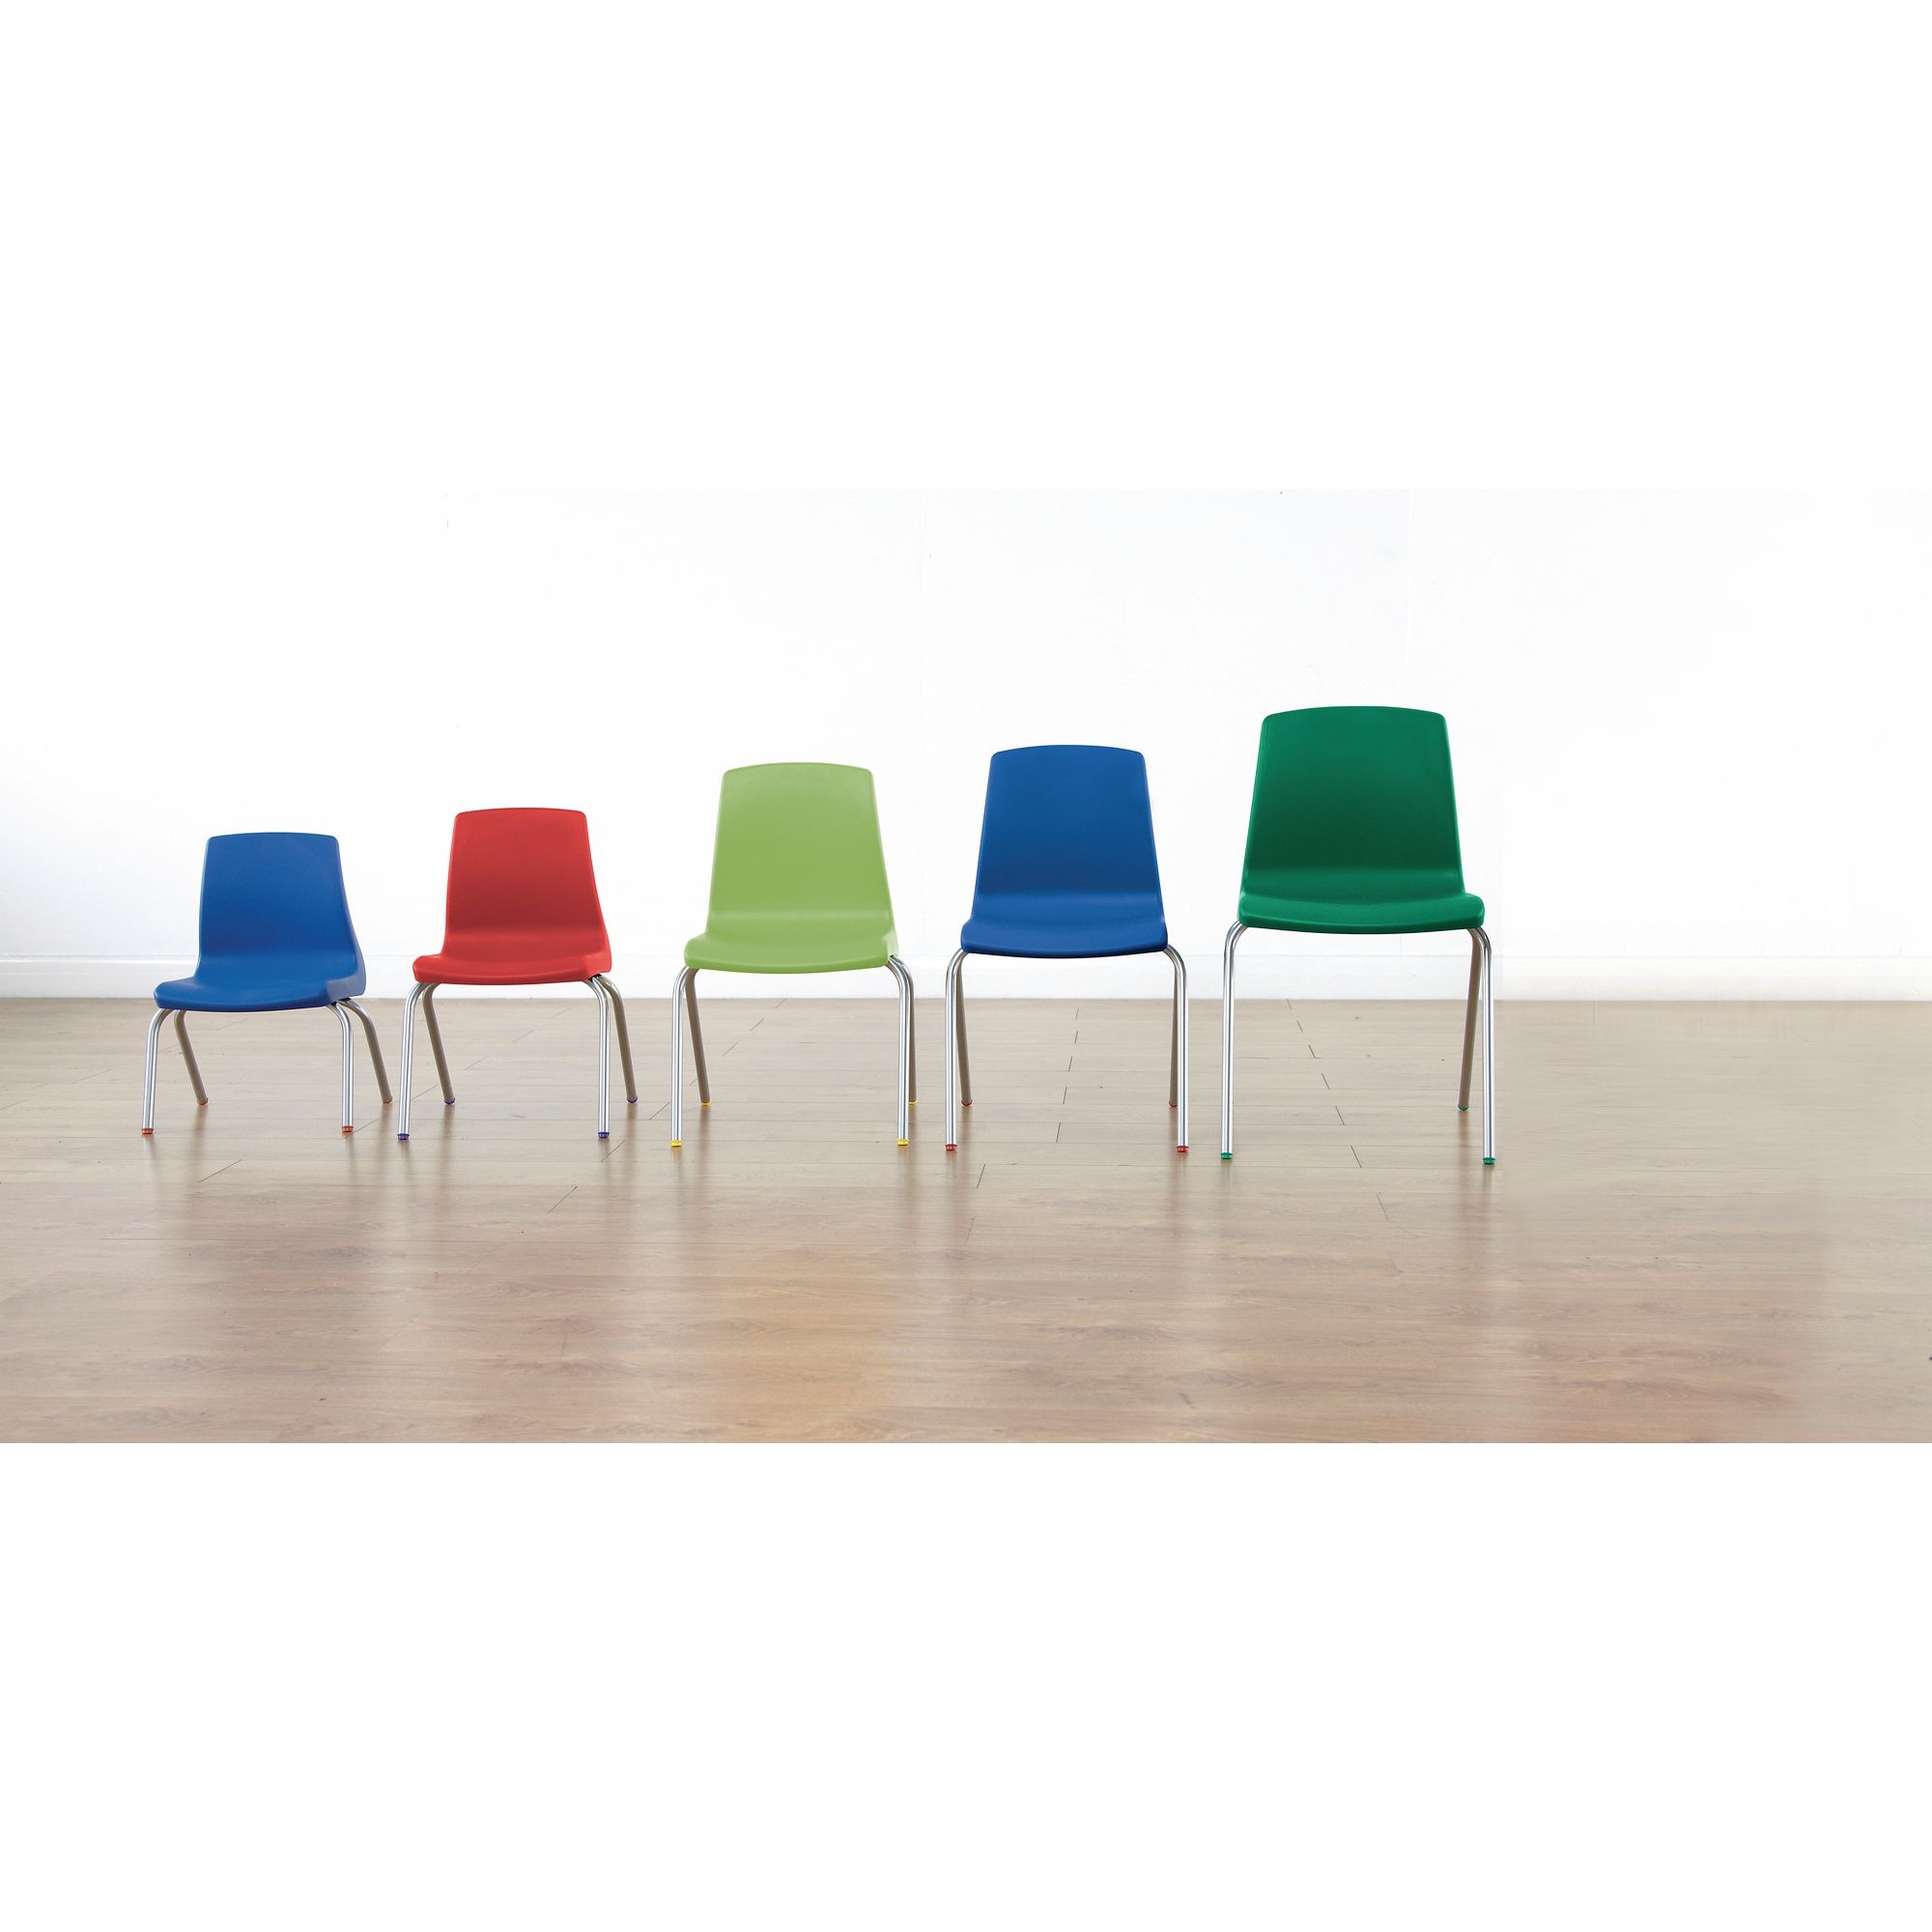 NP Chair - Size E - 430mm - Green